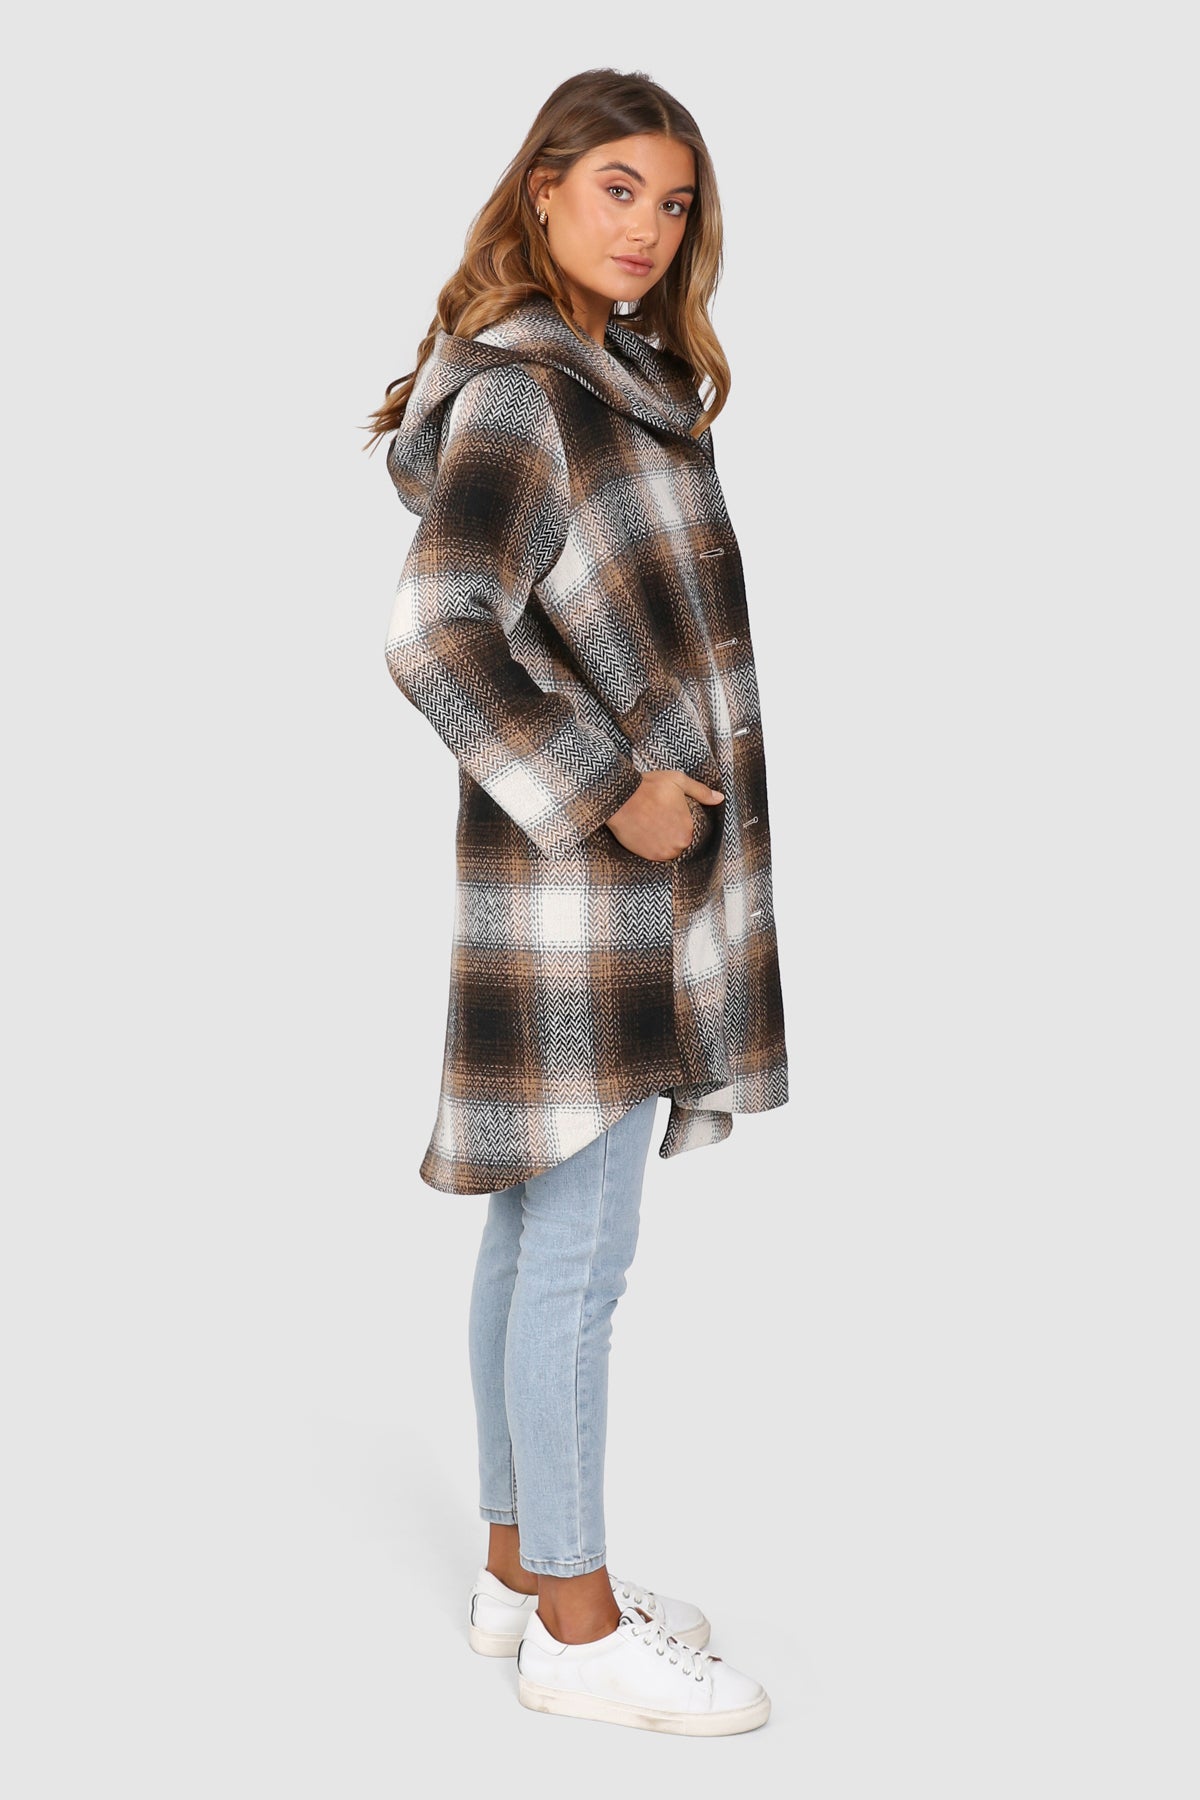 Bailage Haired Caucasian female wearing Plaid Print  Two-oversized front pocket  Relaxed Shoulder  Checkered Lapel Coat  Mid-Length  Buttoned Down  Hooded  Overcoat  Jacket  paired with cotton round neck white tee and high waisted denim jeans and white sneakers 